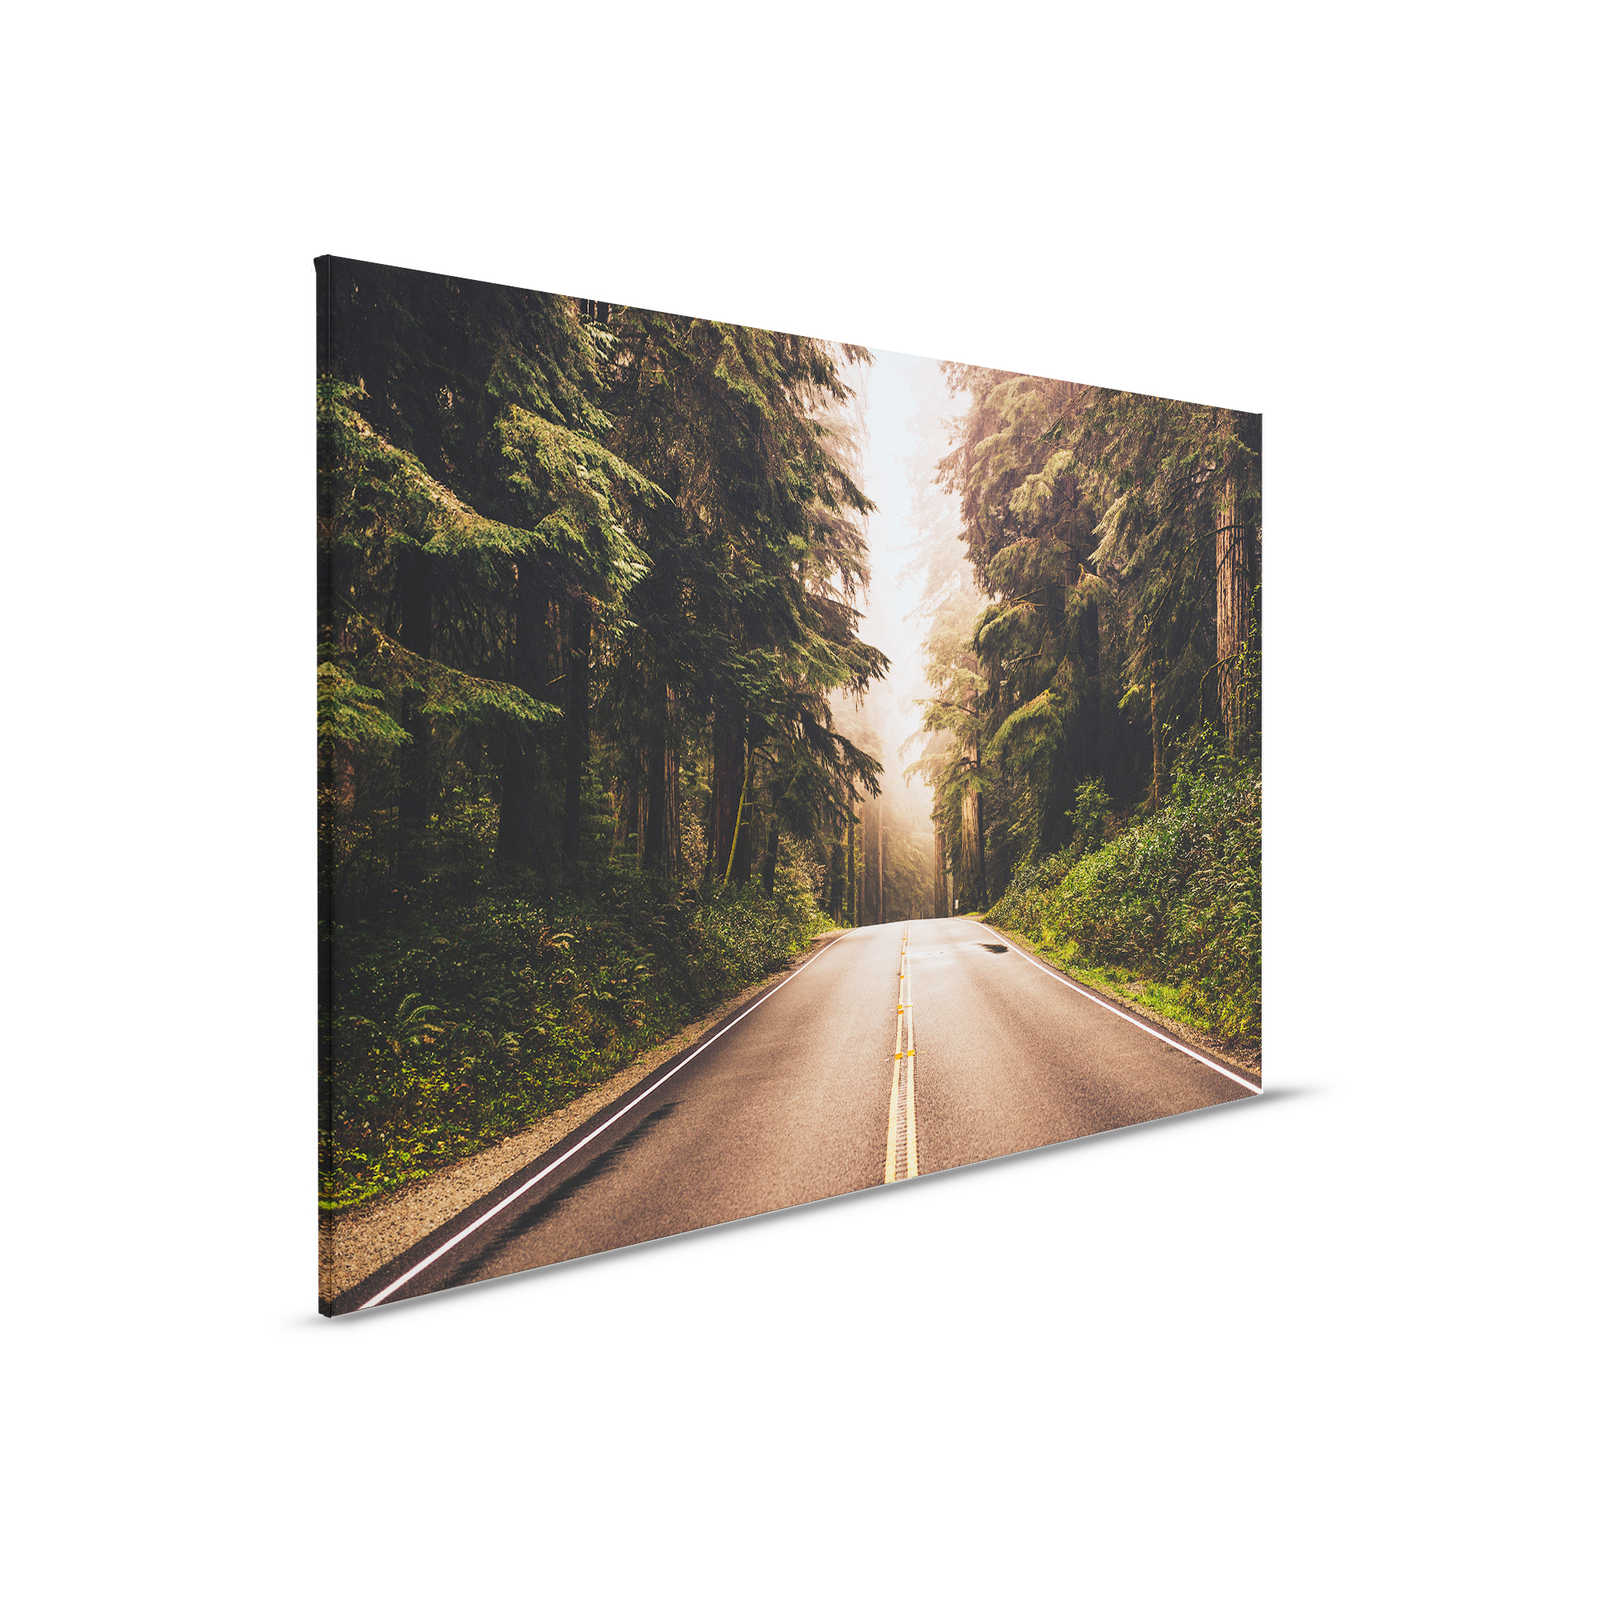         Canvas with American Highway in the Forest - 0.90 m x 0.60 m
    